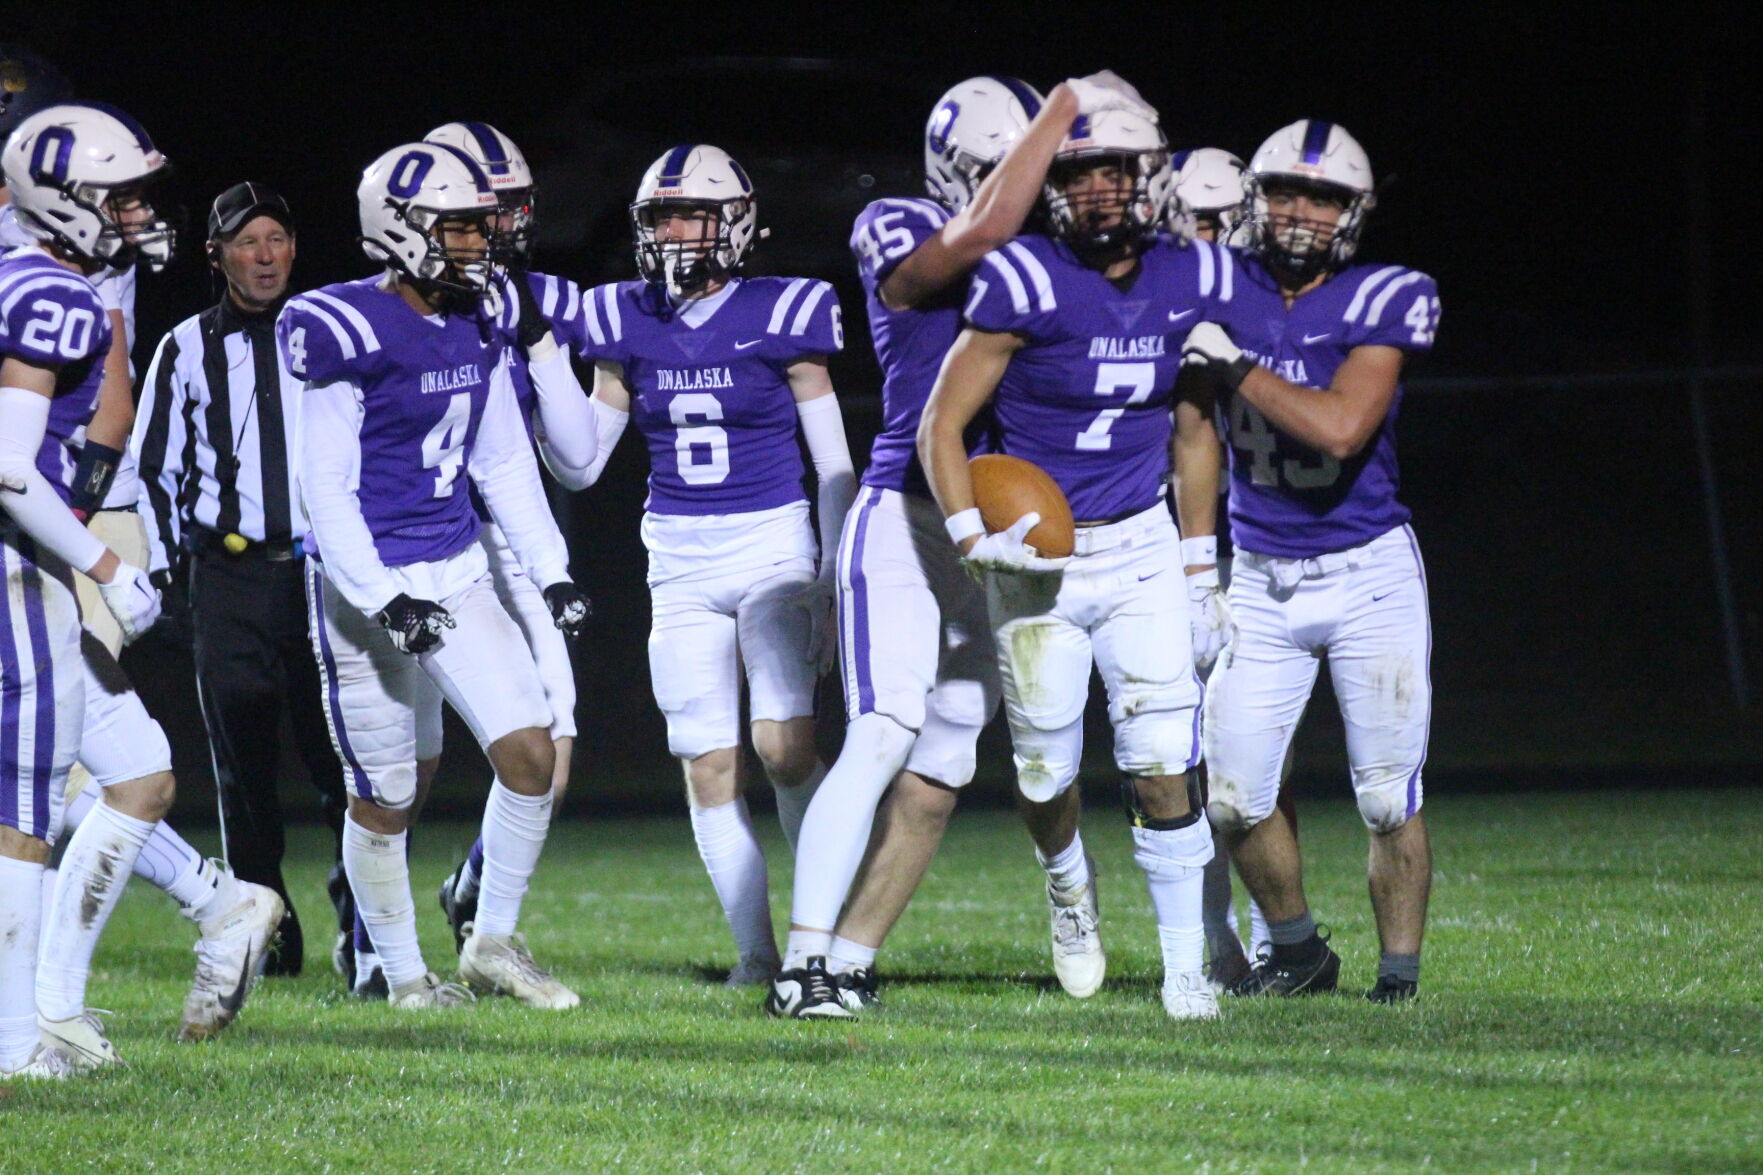 Onalaska High School dominates Medford with a 35-16 victory in Division 3 second-round game